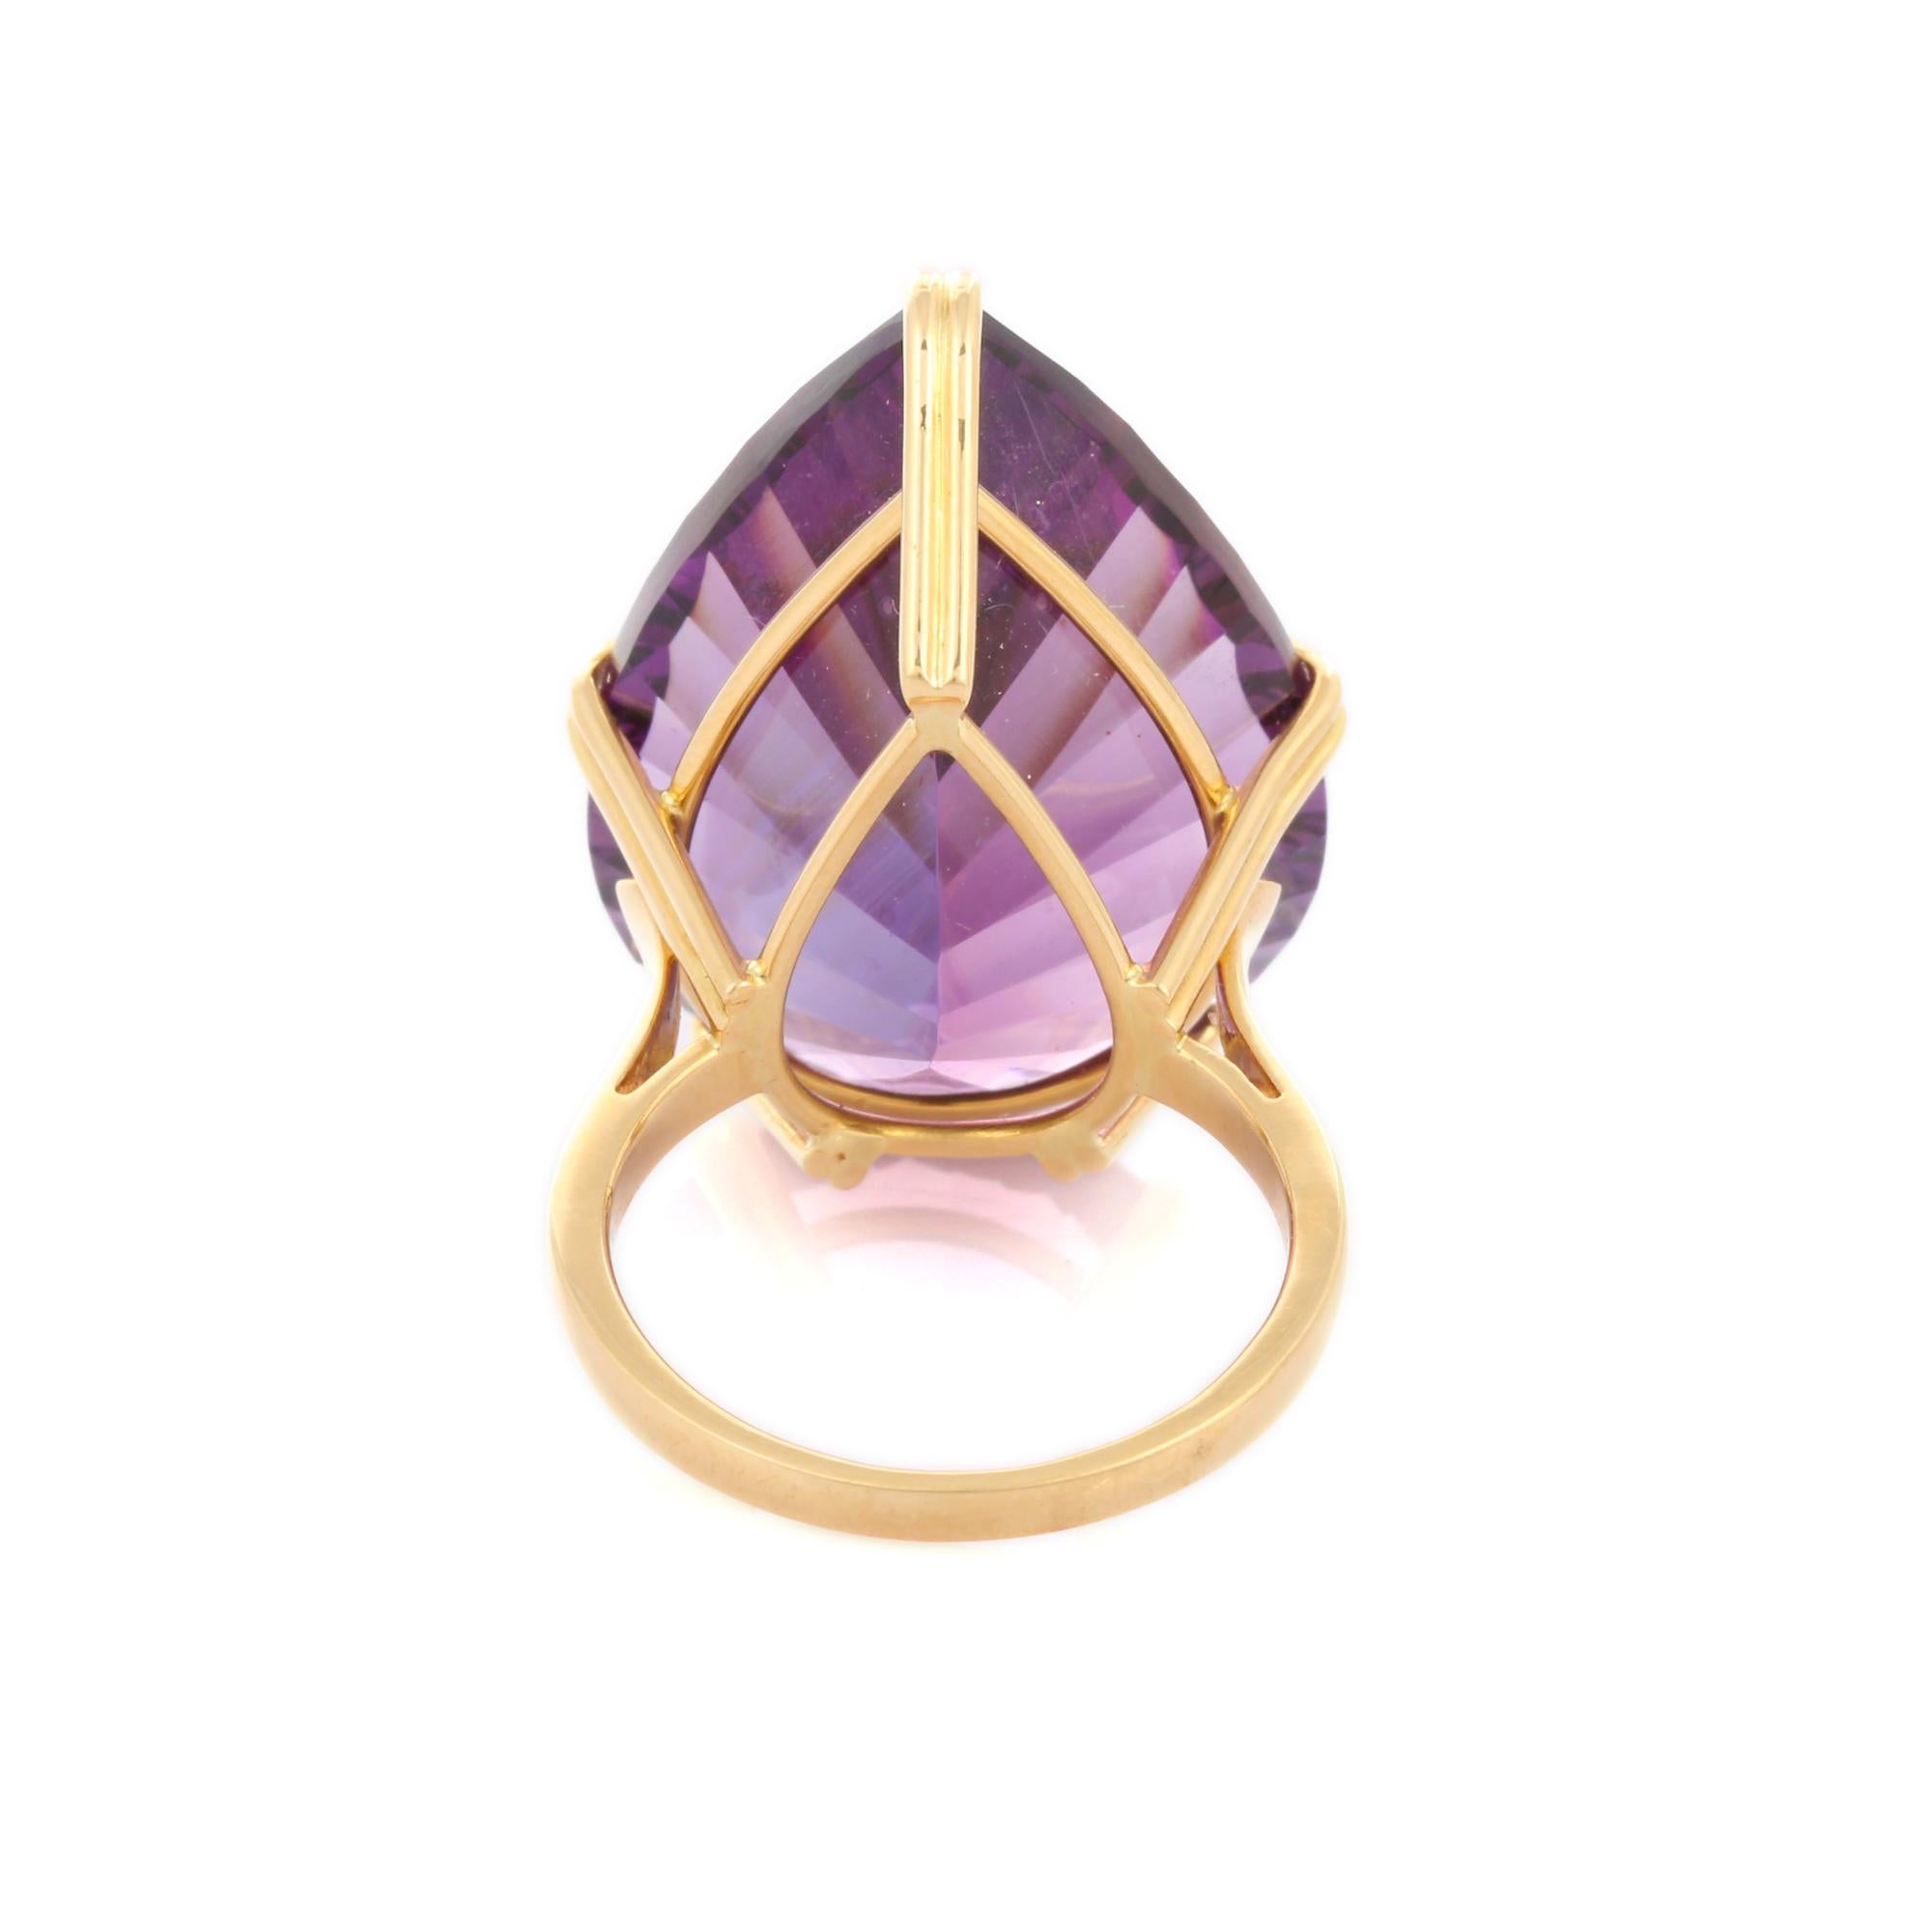 For Sale:  18K Yellow Gold 34.23 Carat Amethyst Cocktail Ring 7